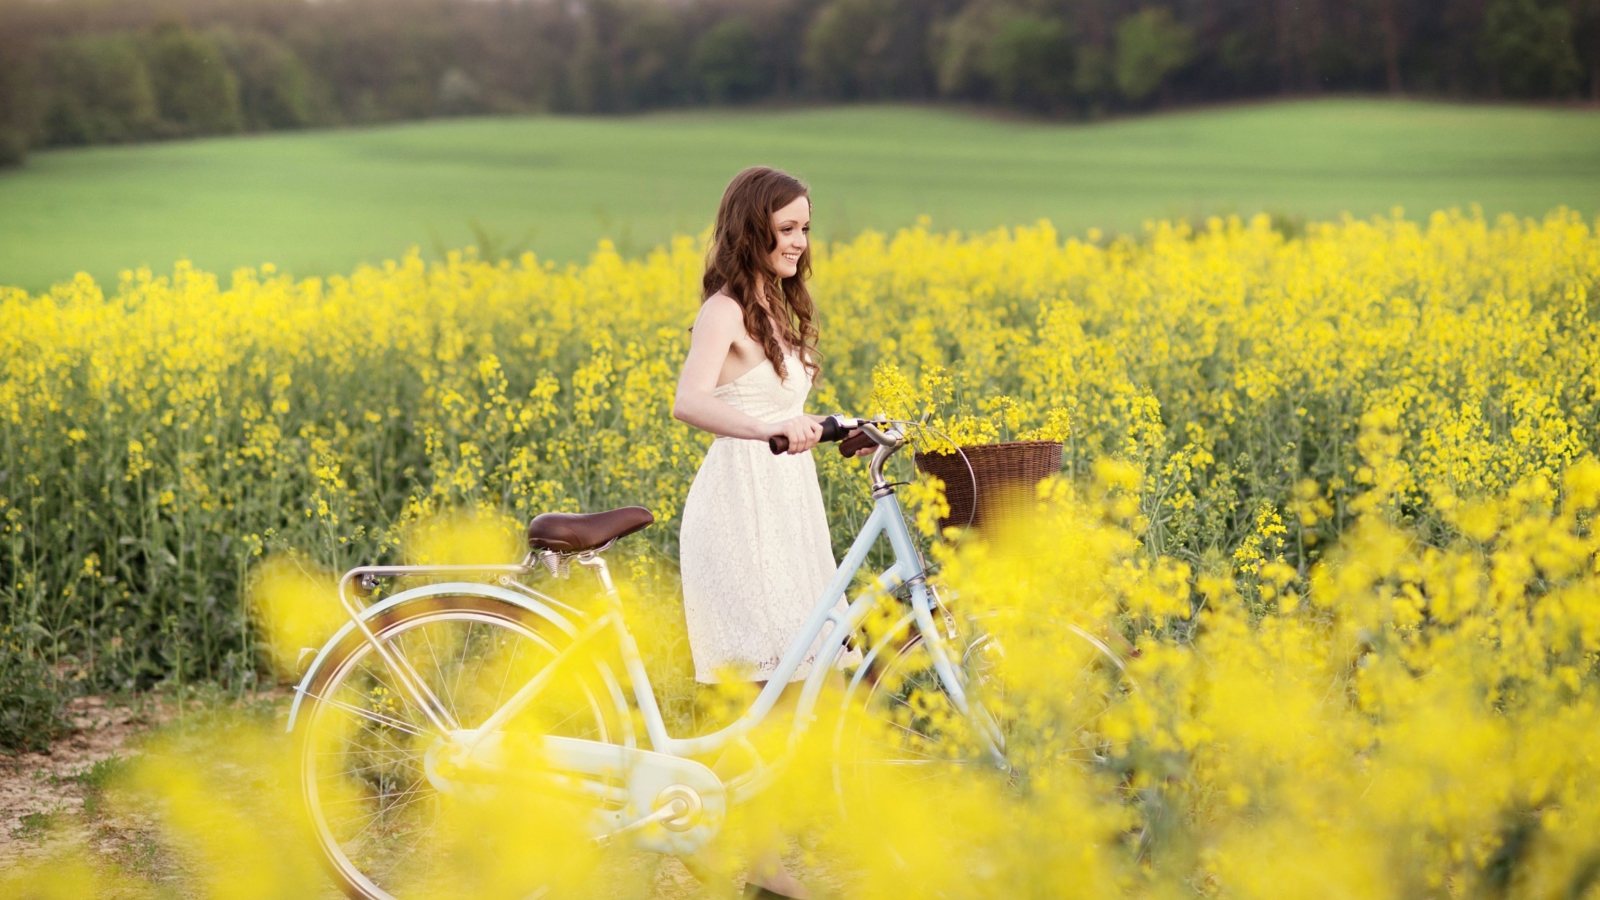 Girl With Bicycle In Yellow Field wallpaper 1600x900